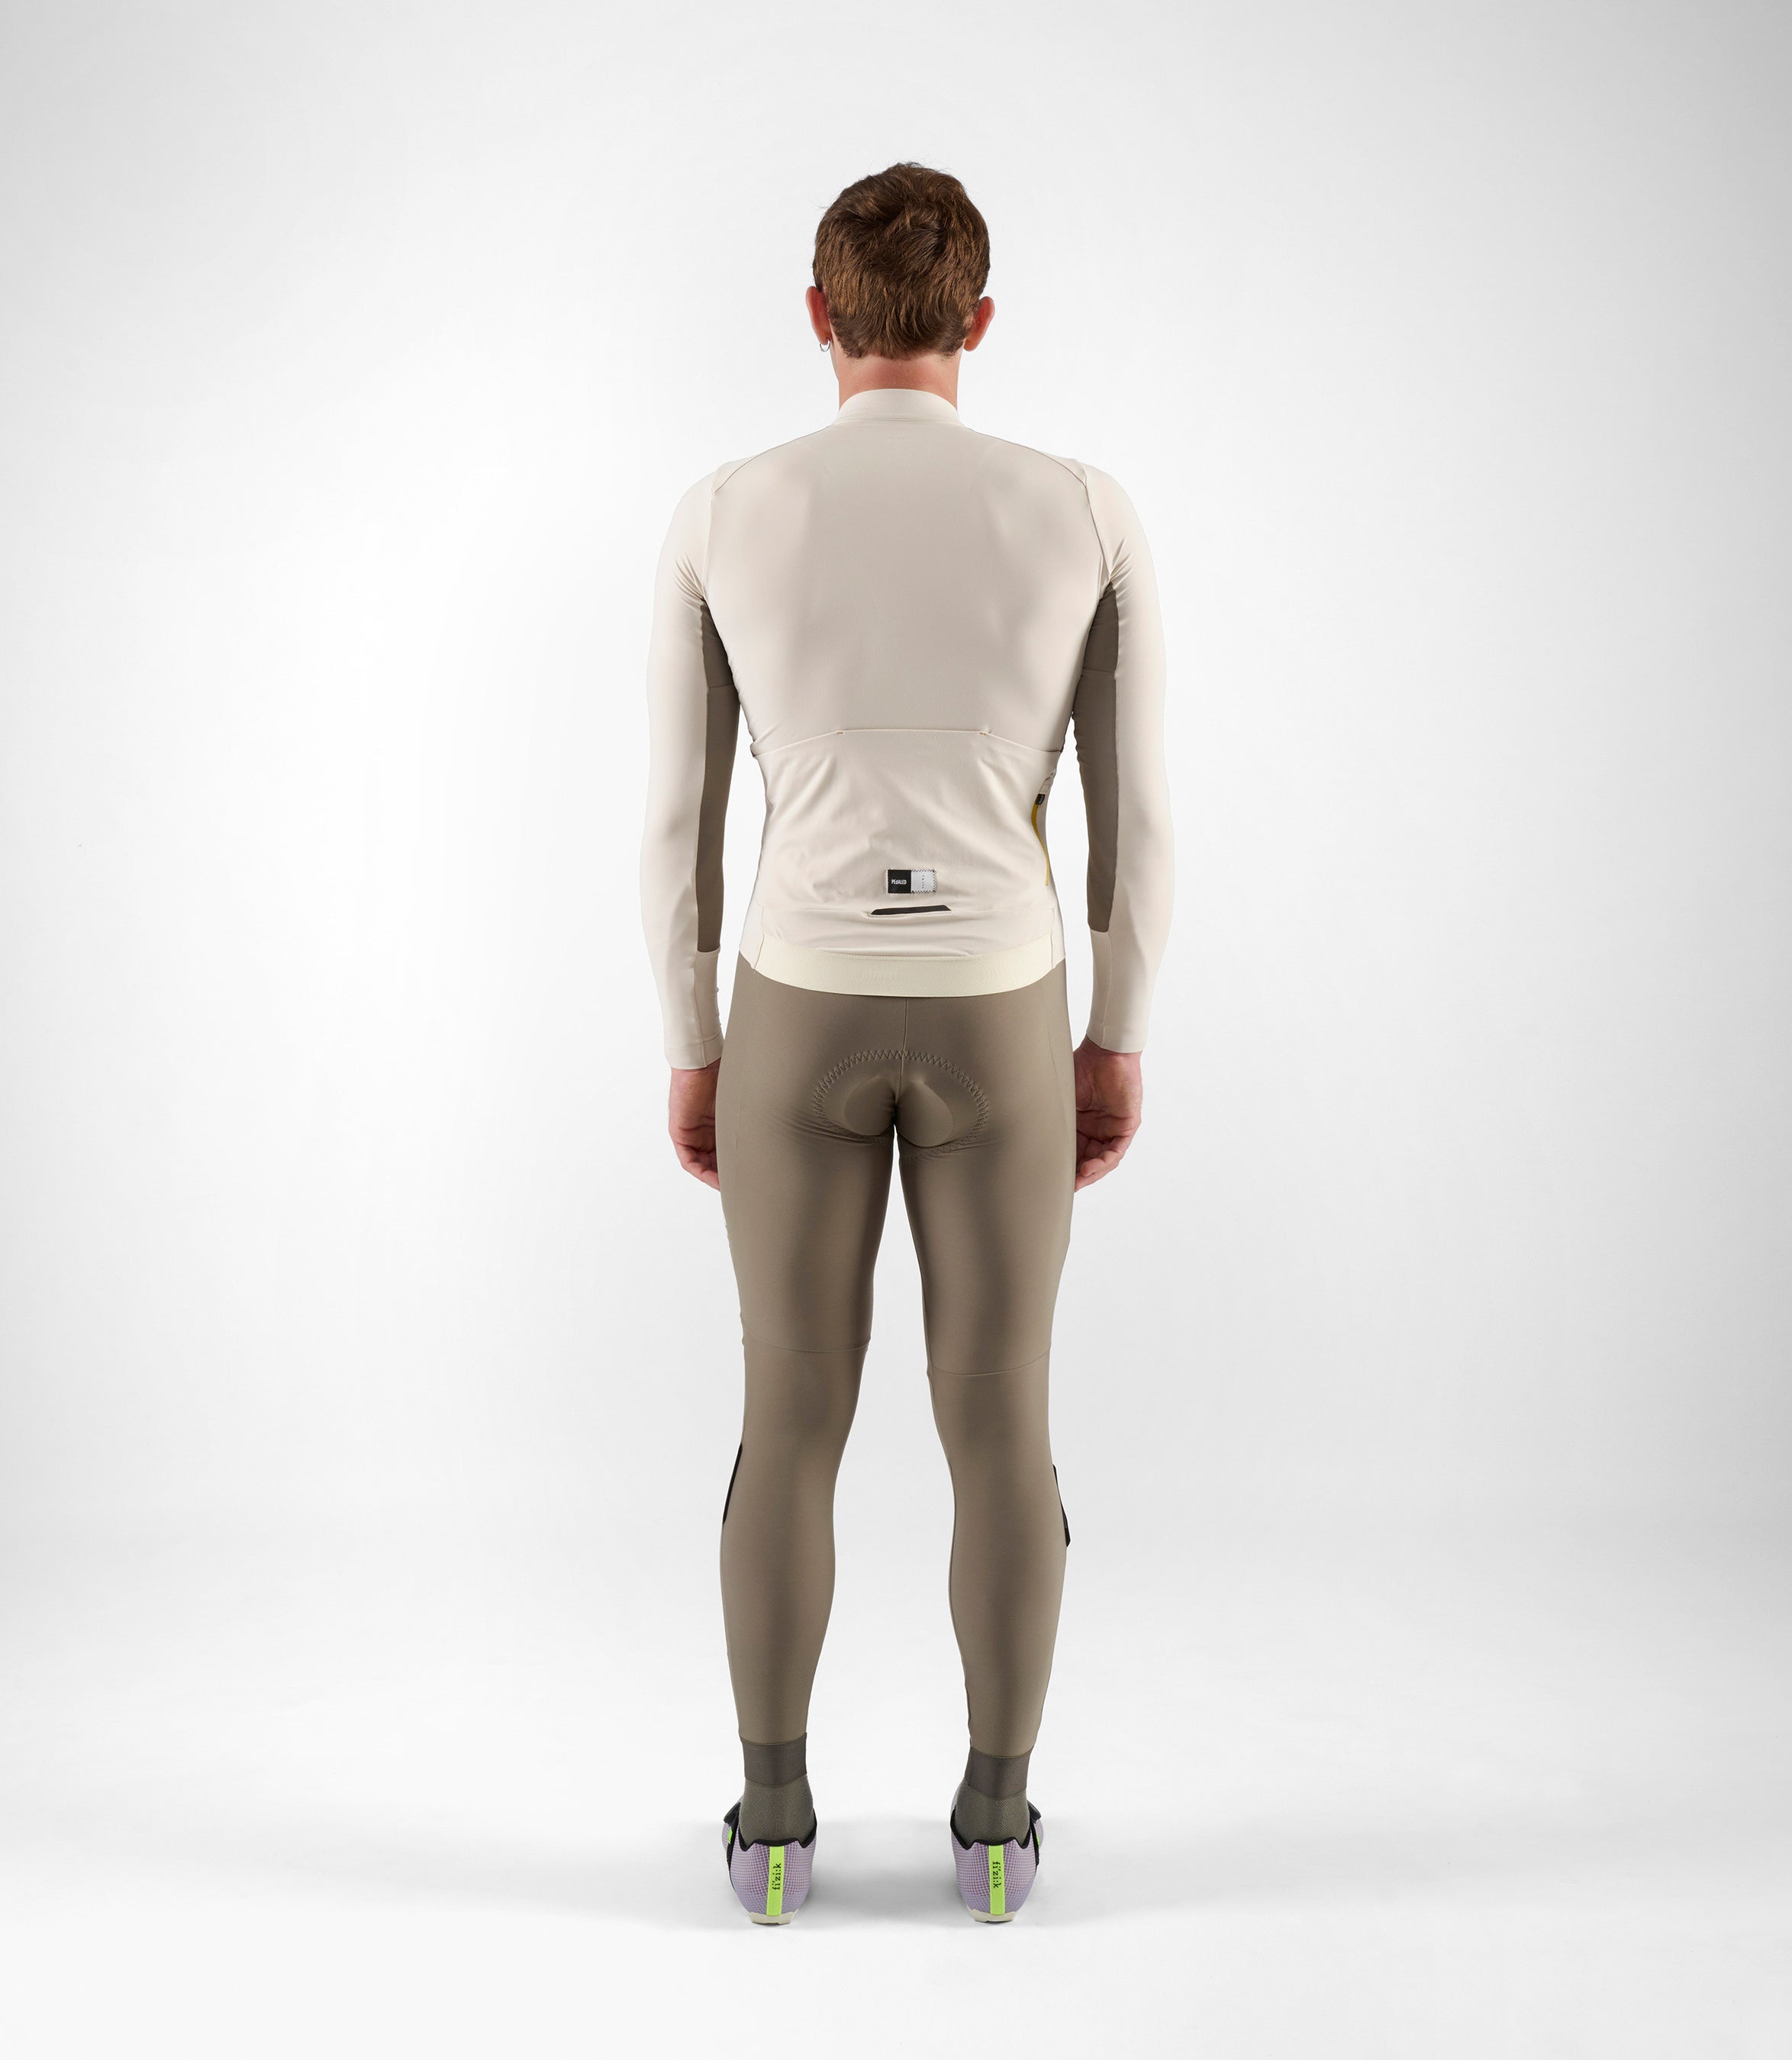 24WJSEL0GPE_3_men cycling jersey long sleeve off white element total body back pedaled